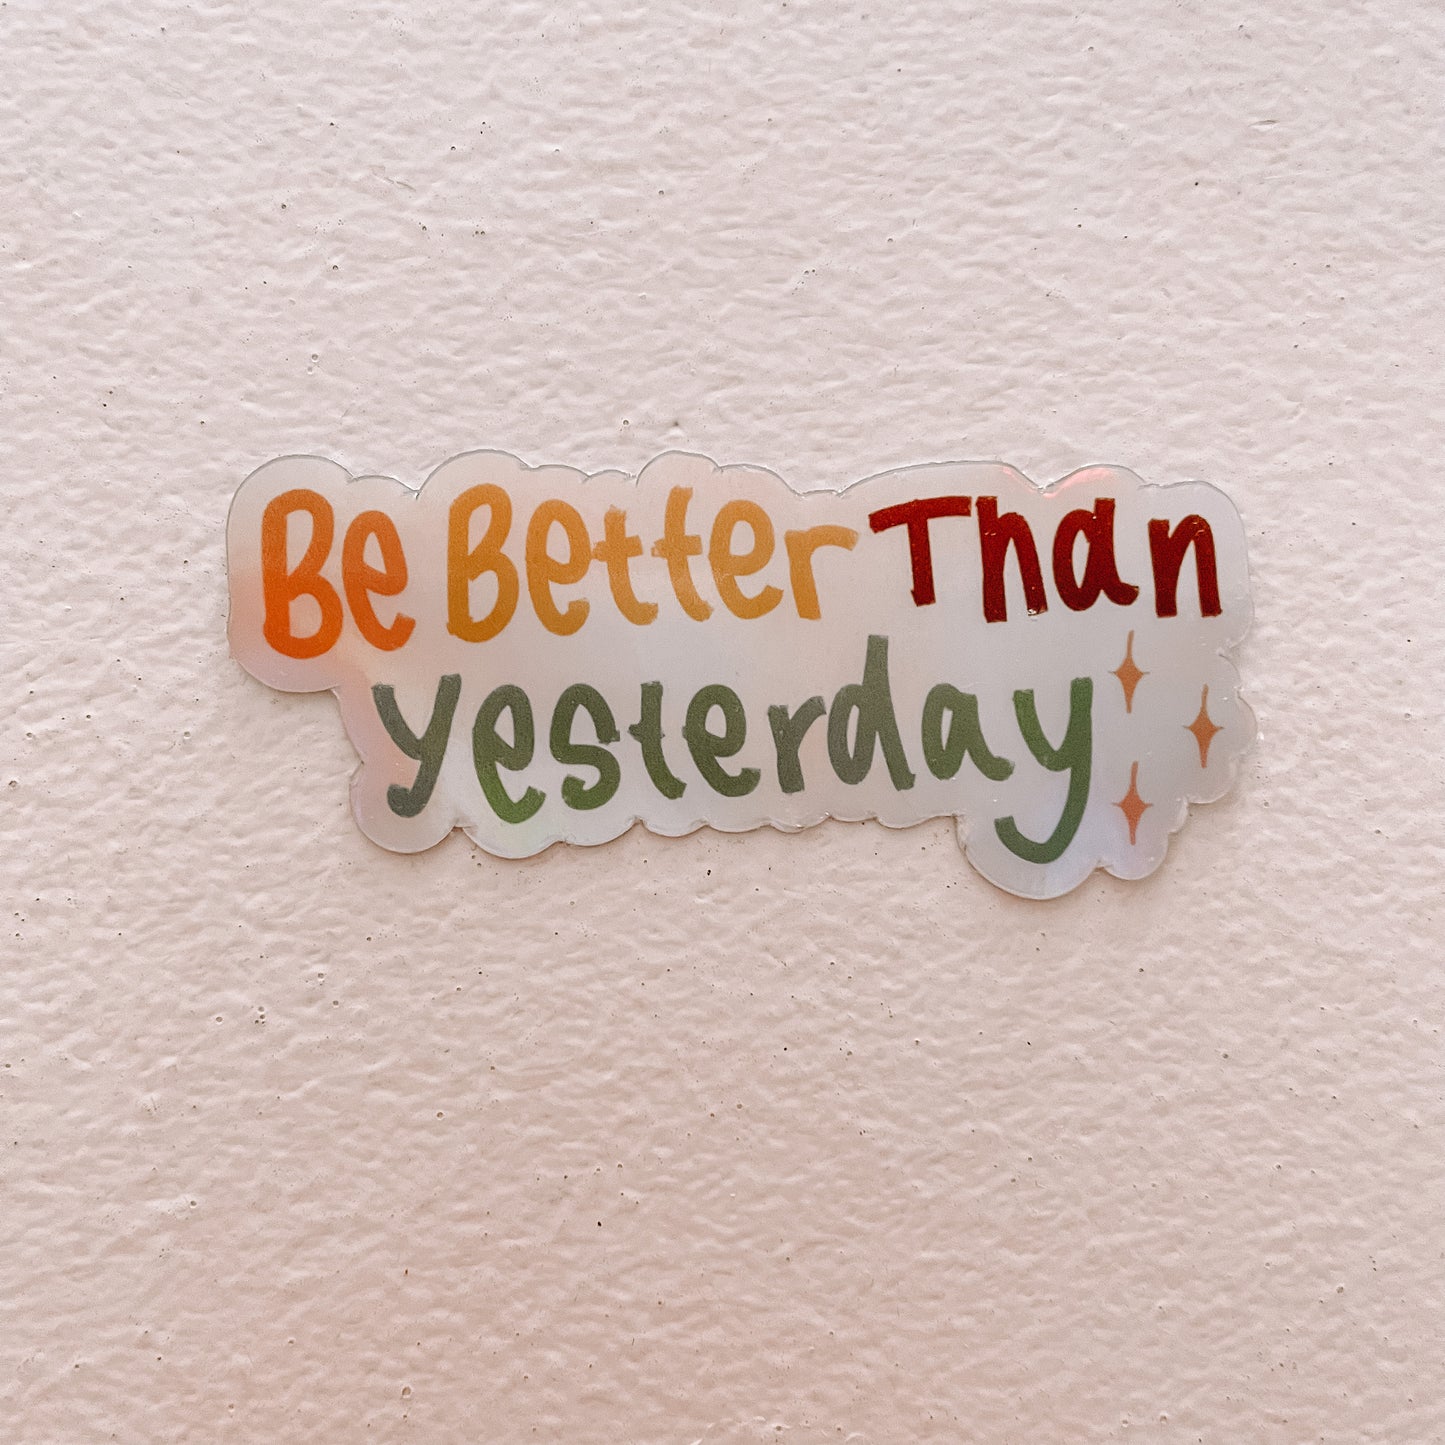 Holographic Motivational Quote and Small Business Owner Waterproof Vinyl Sticker